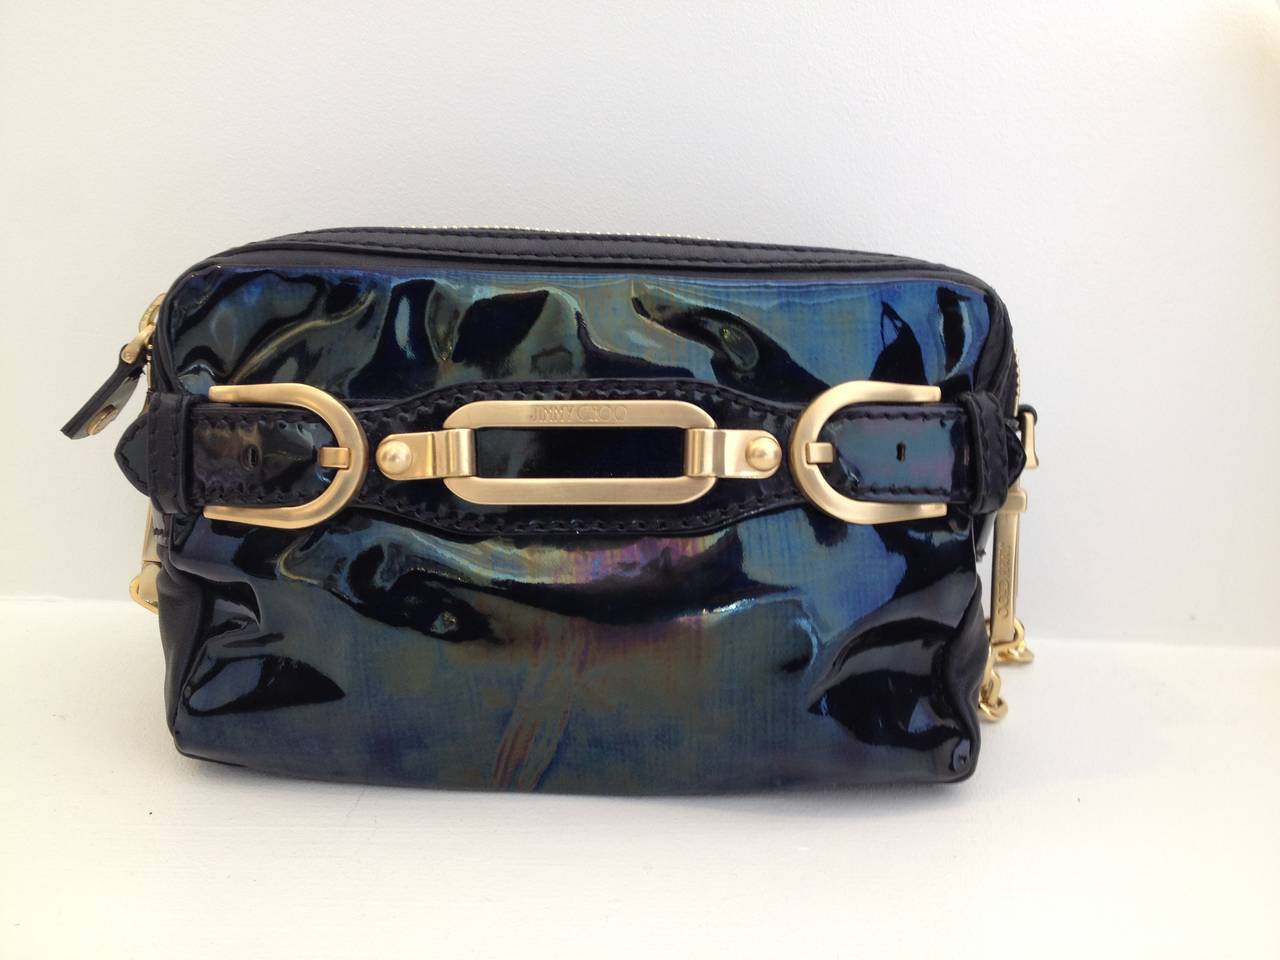 What a fun little purse! This Jimmy Choo bag combines an iridescent patent front with buttery soft black leather, outfitted with oversized gold buckles and chain hardware. The long 14 inch drop strap is detachable so you can carry it either over